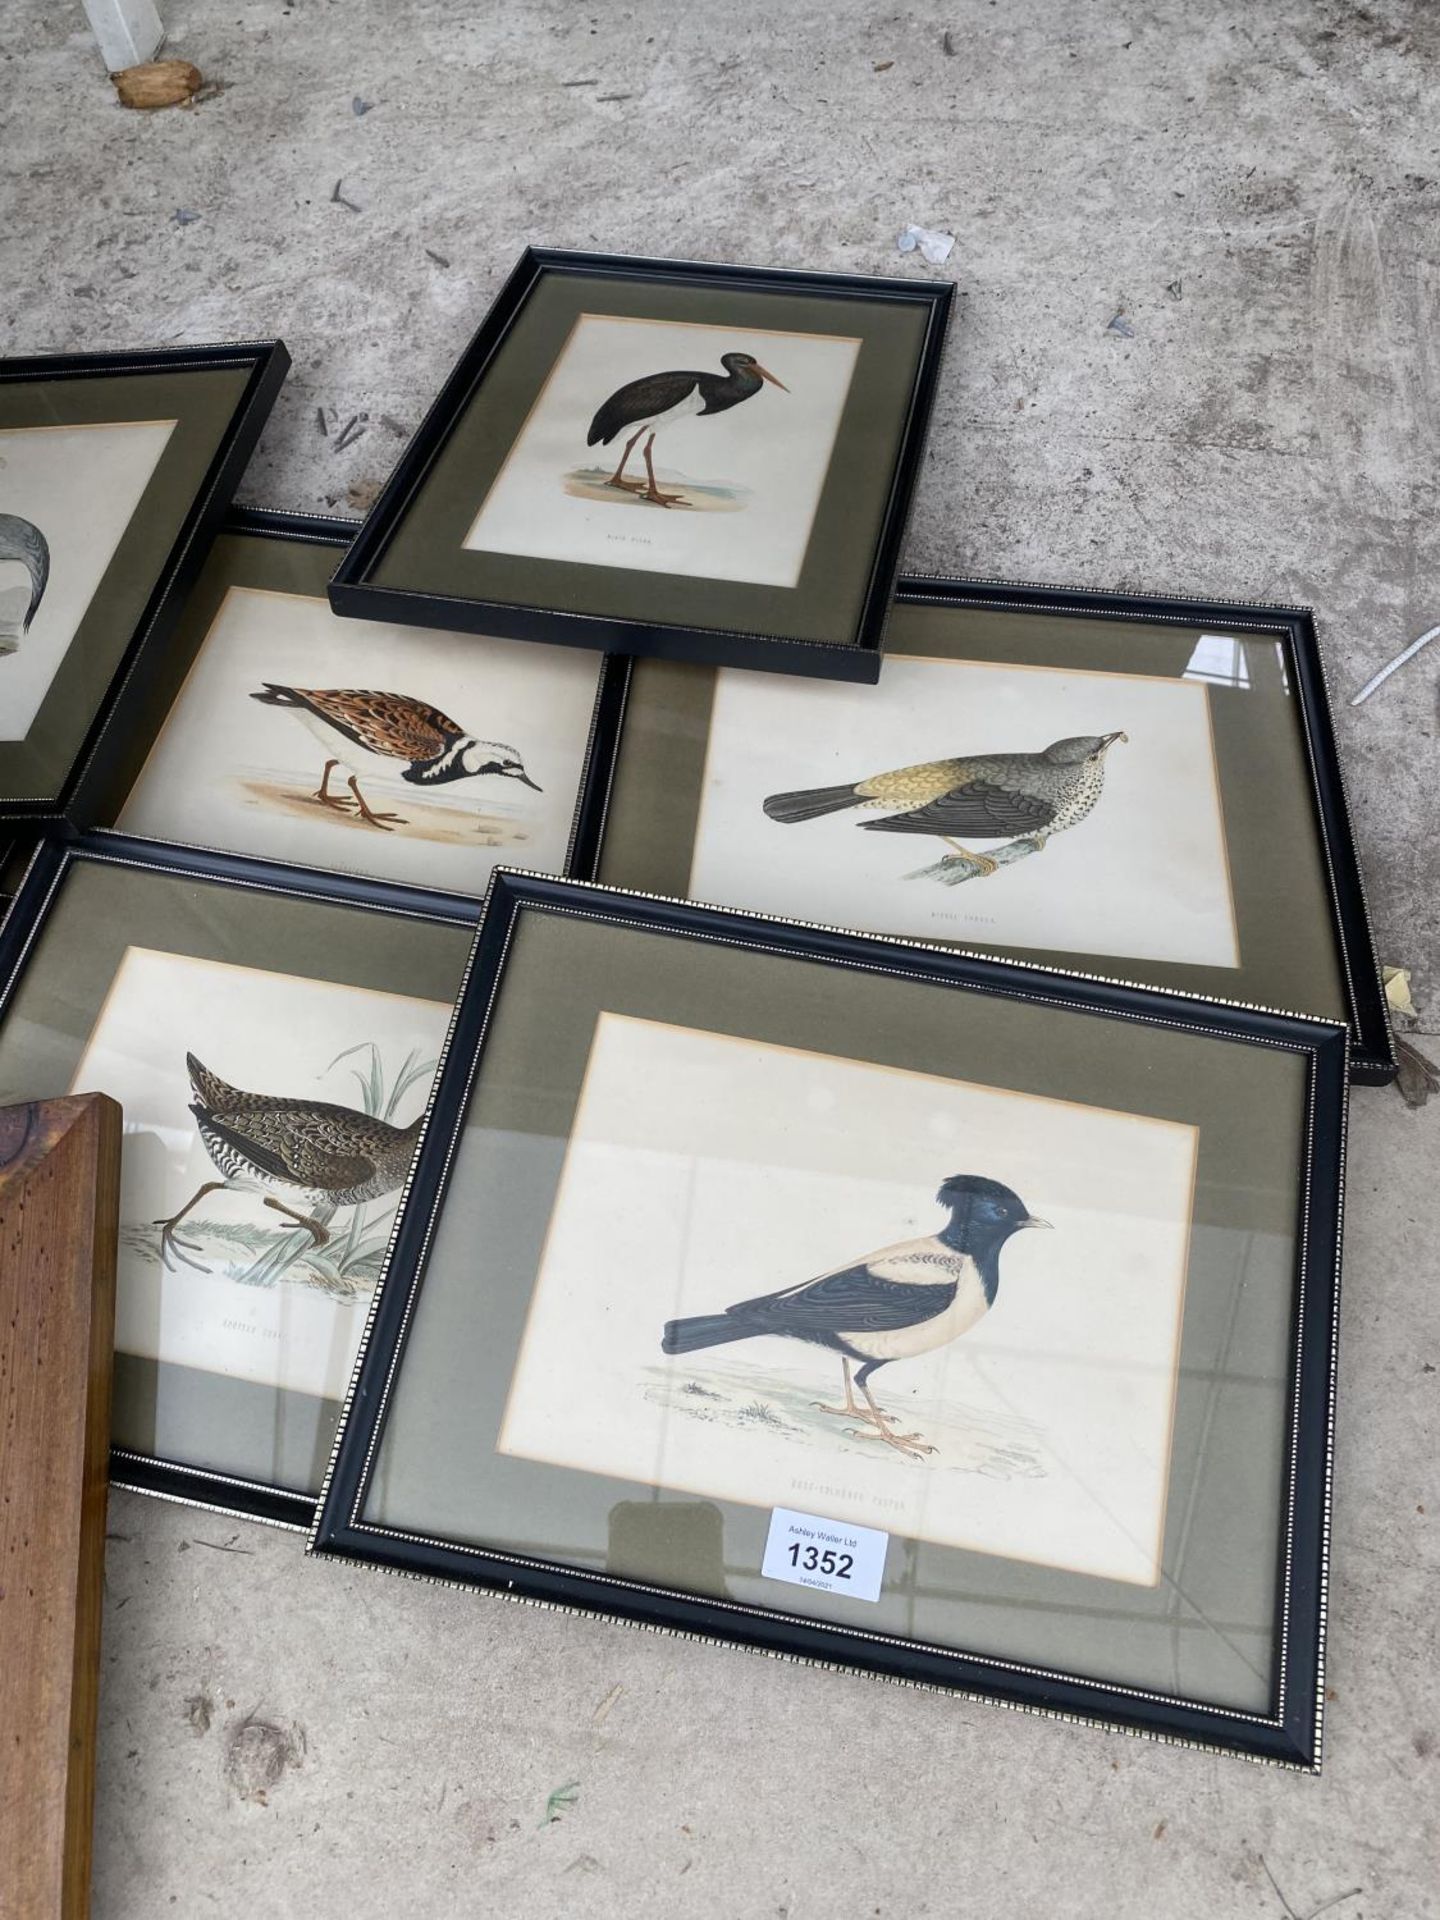 A COLLECTION OF FRAMED PRINTS OF BIRDS - Image 2 of 4